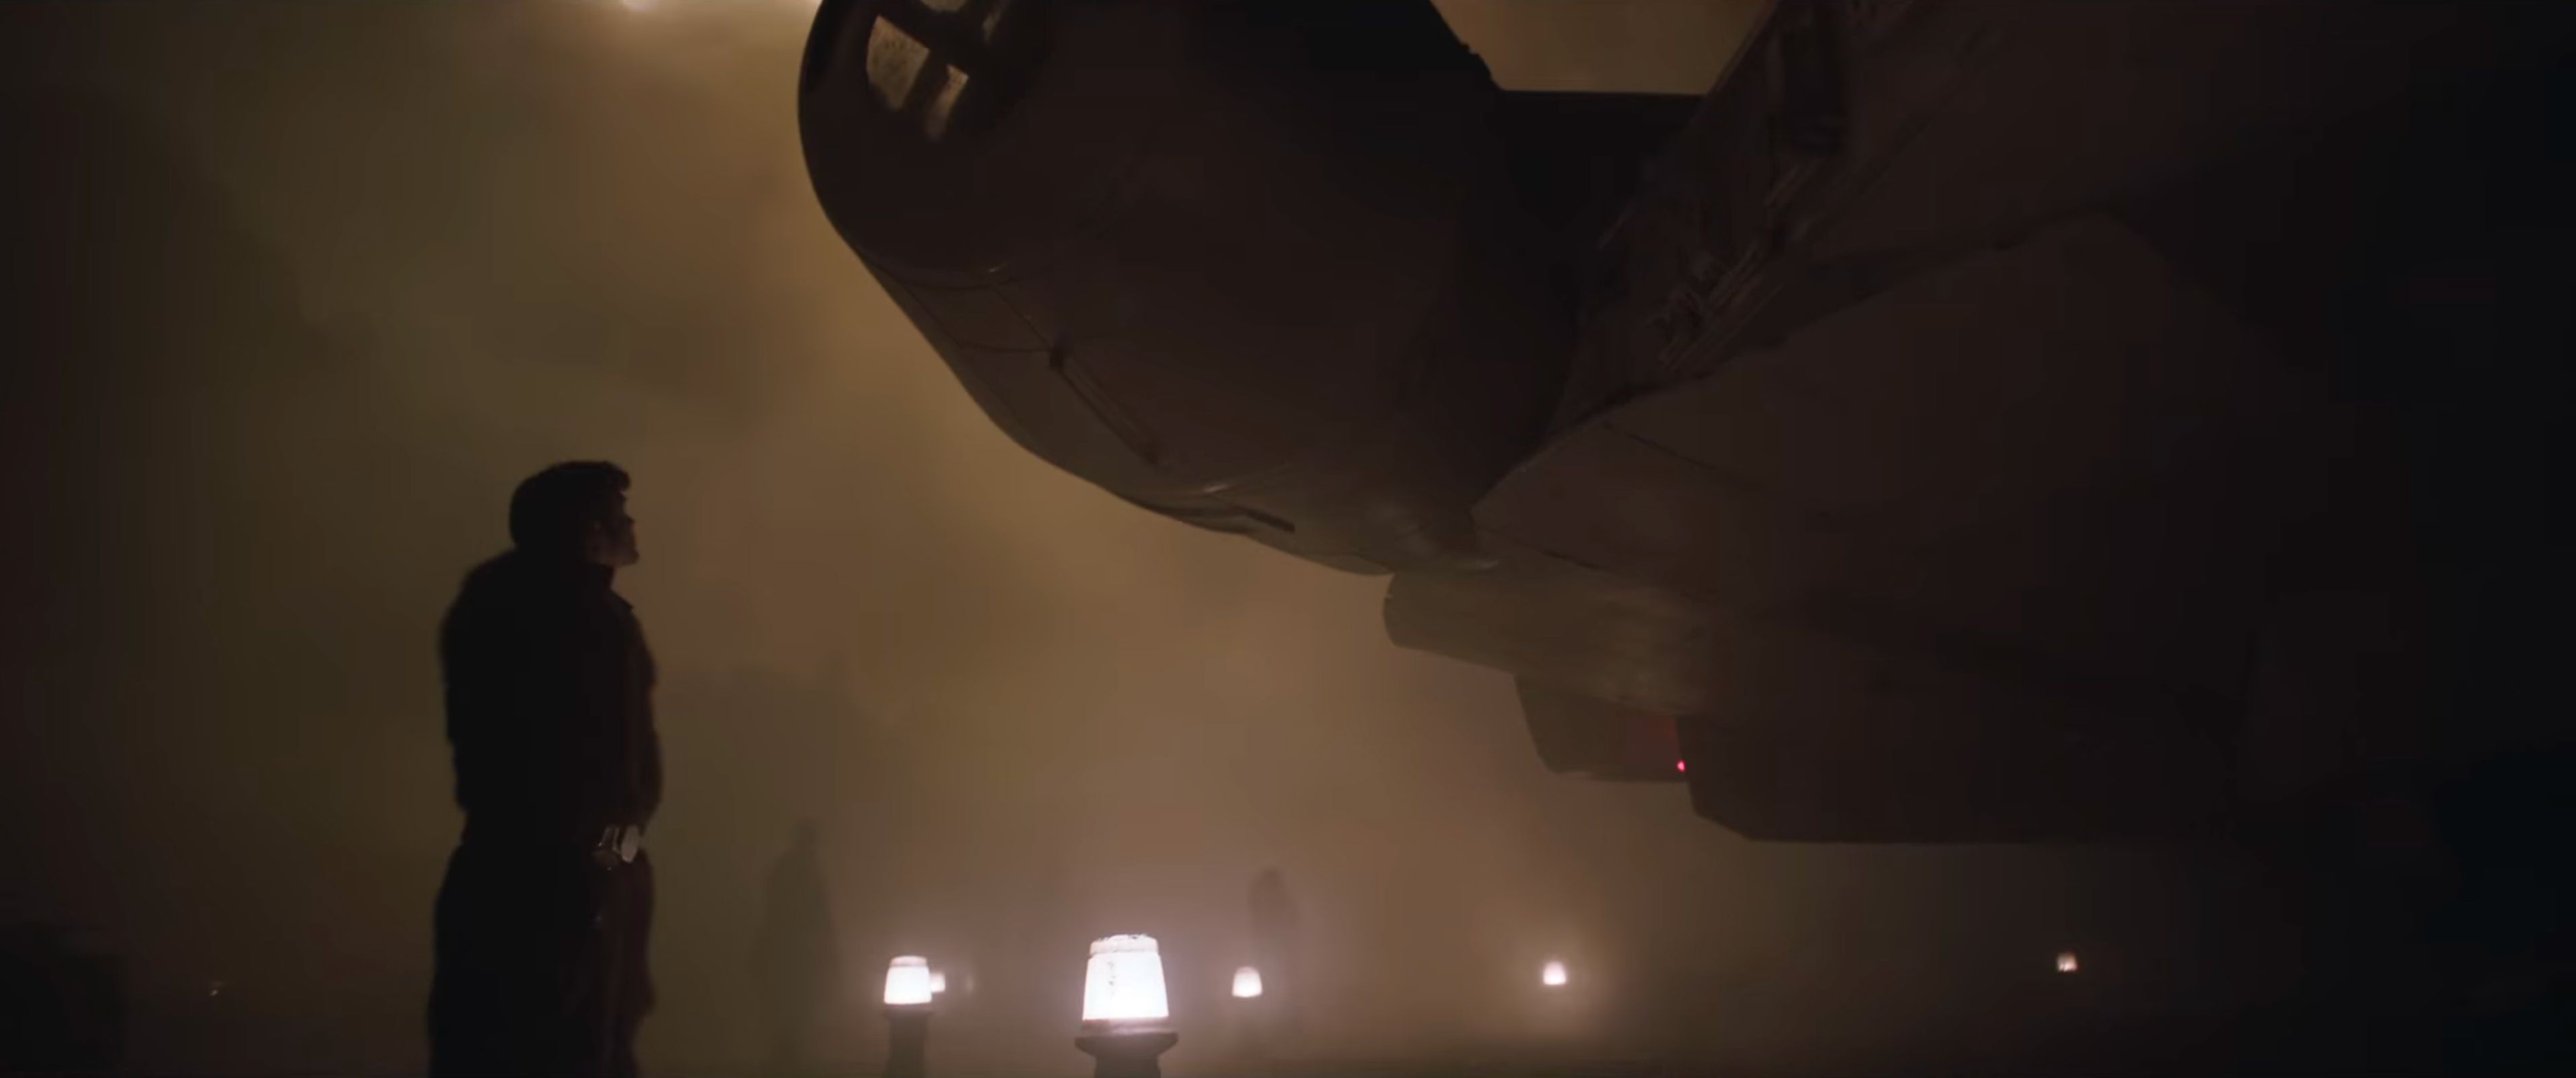 Solo: A Star Wars Story photo 14